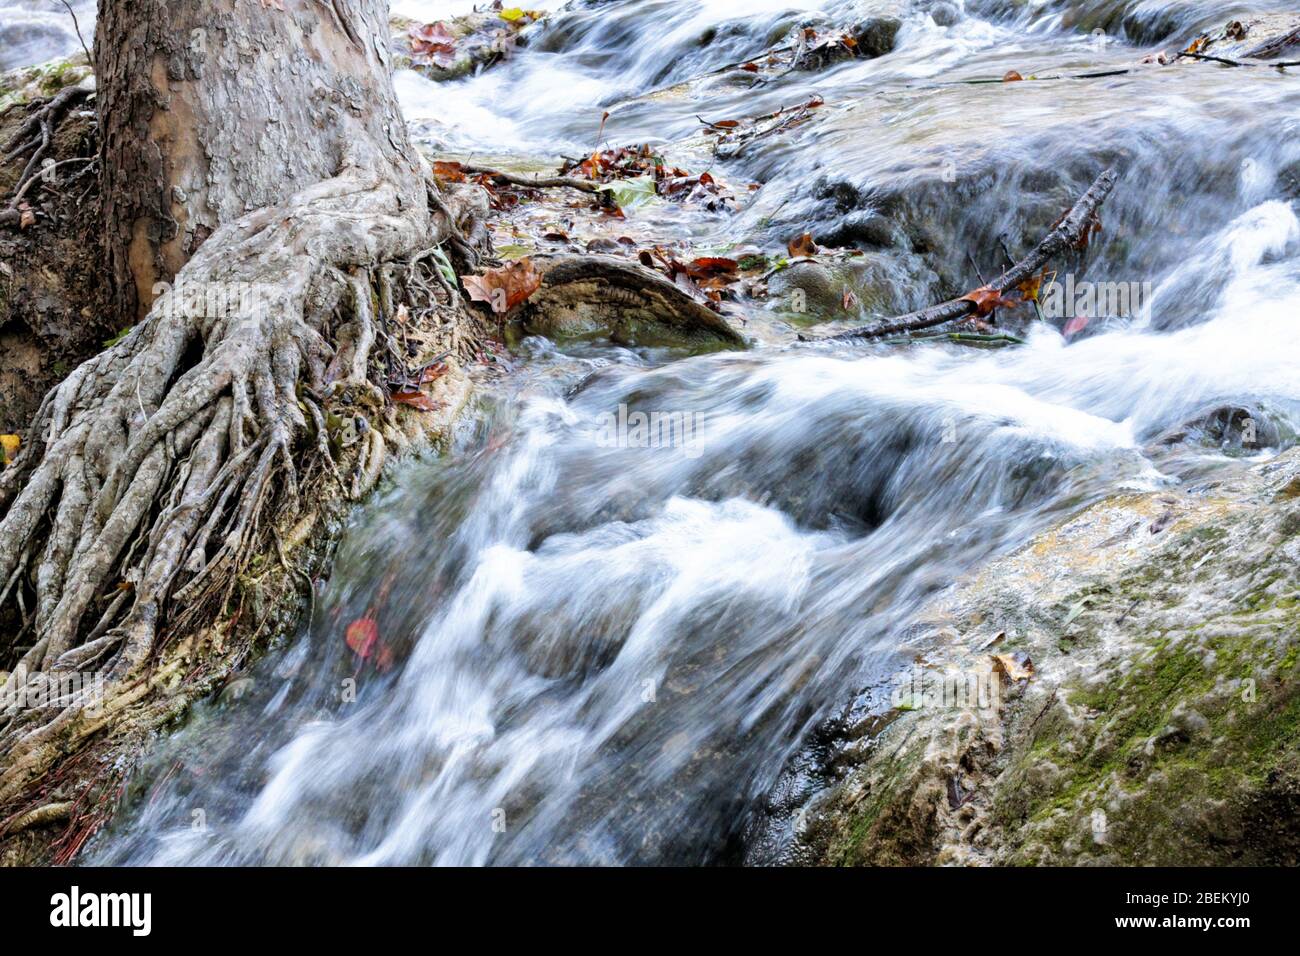 Water from Little Niagra Falls in Sulphur Oklahoma rushes past a tree trunk with roots reaching into the water. Stock Photo